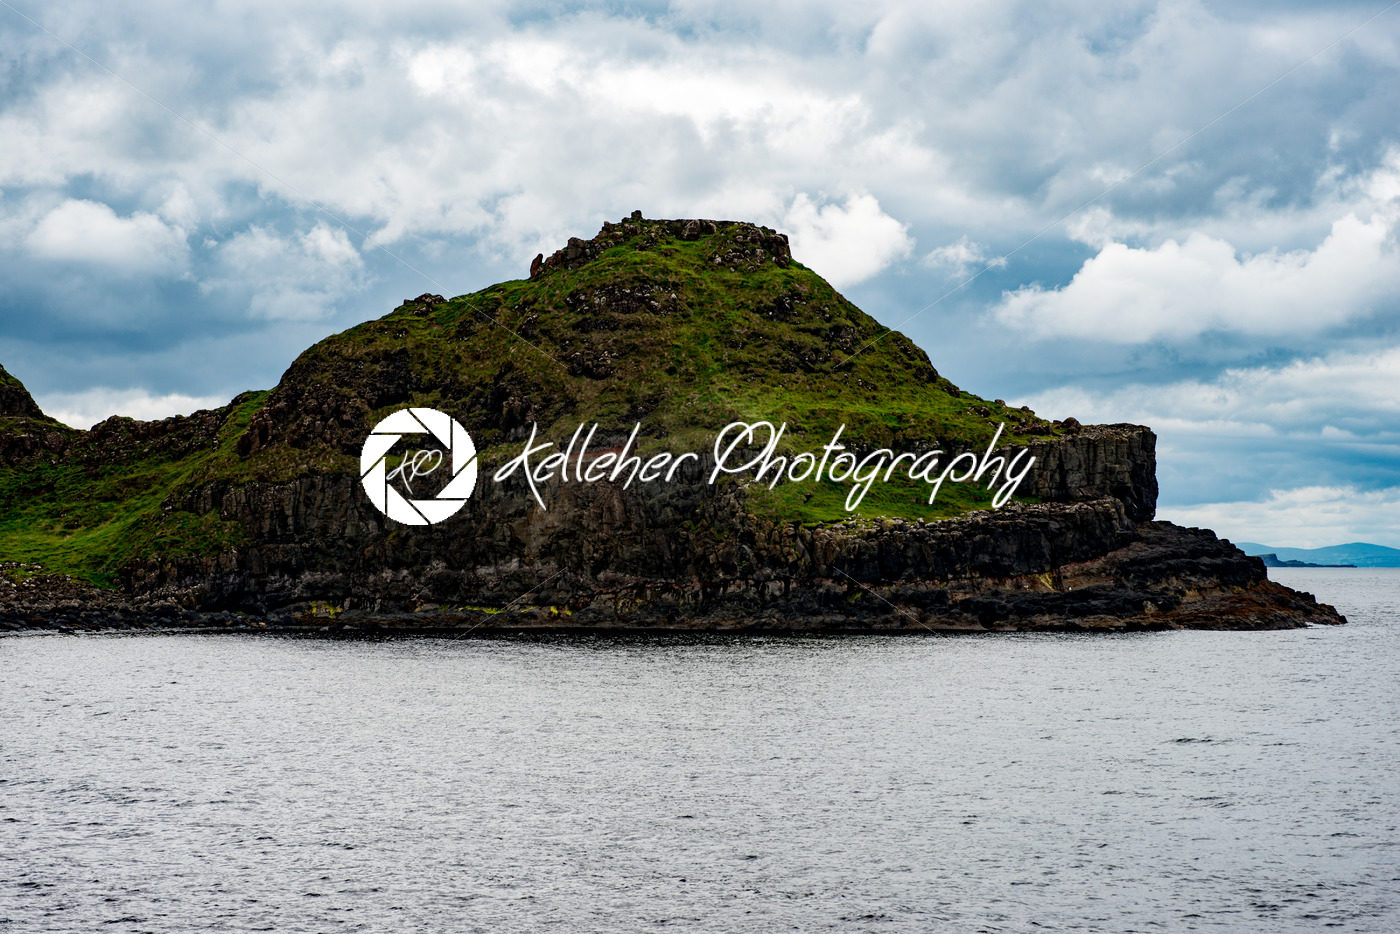 The Giant’s Causeway in County Antrim, Northern Ireland - Kelleher Photography Store